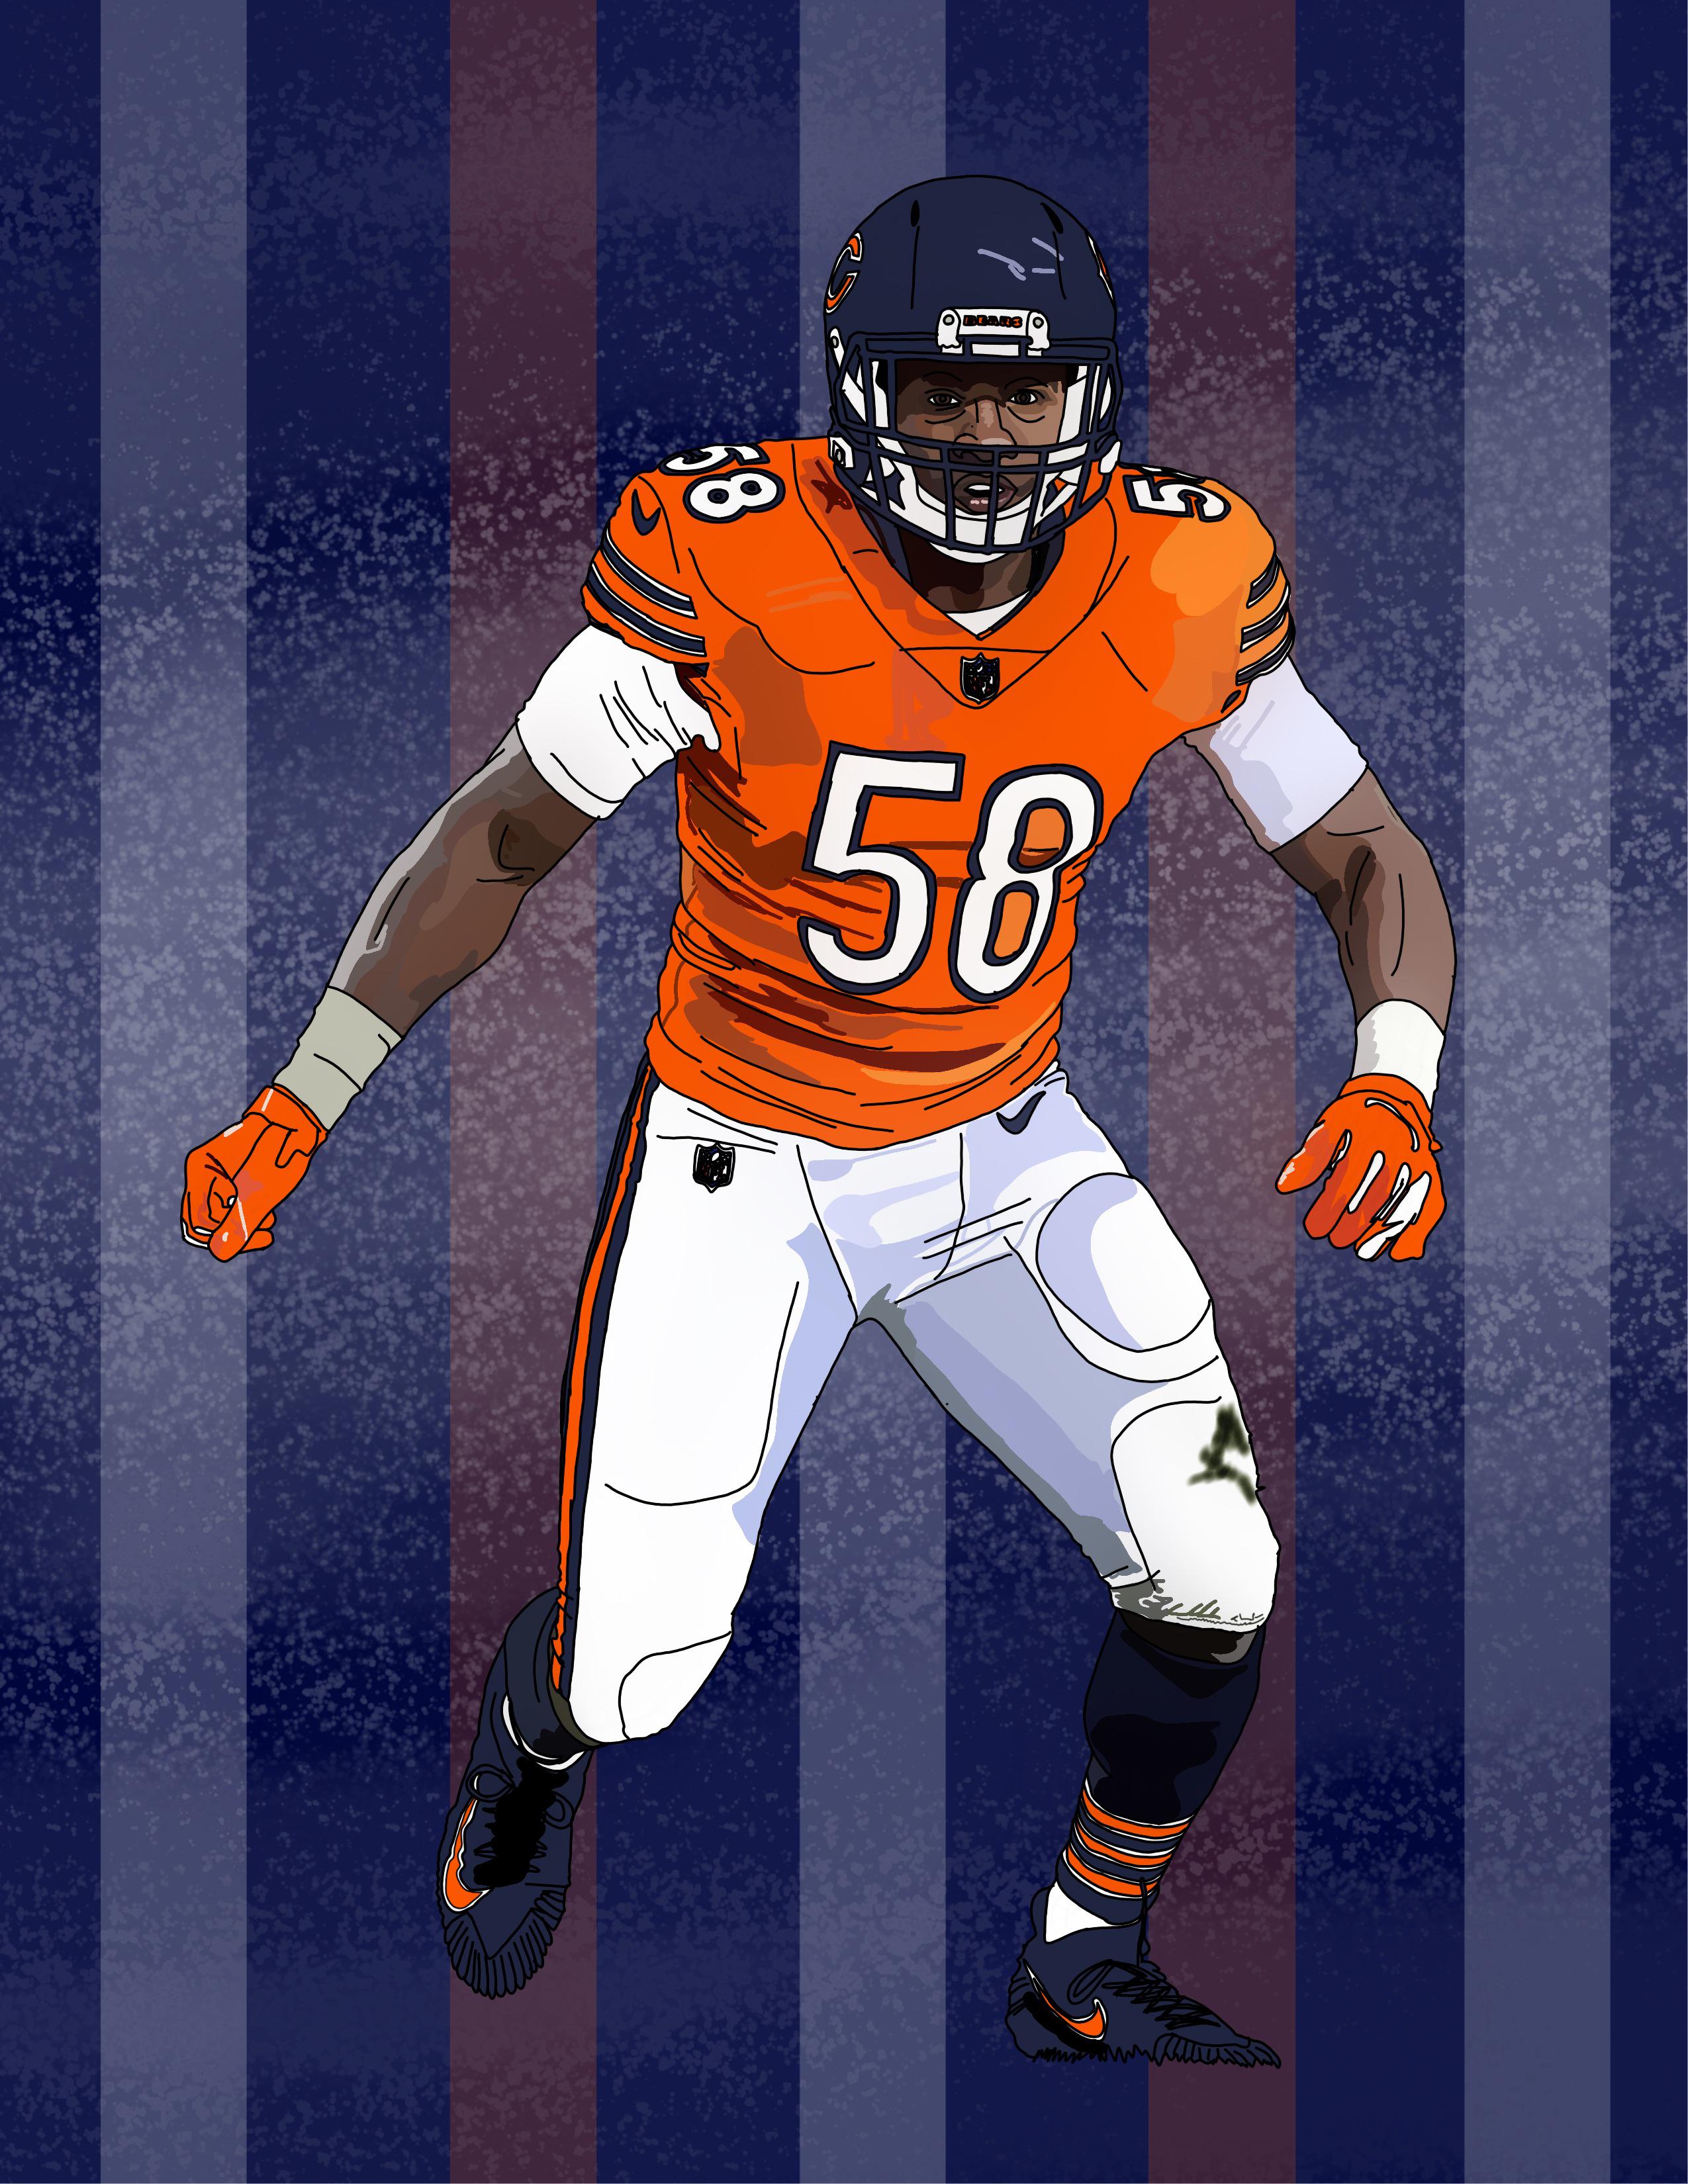 Bears in 100 days. Day 76